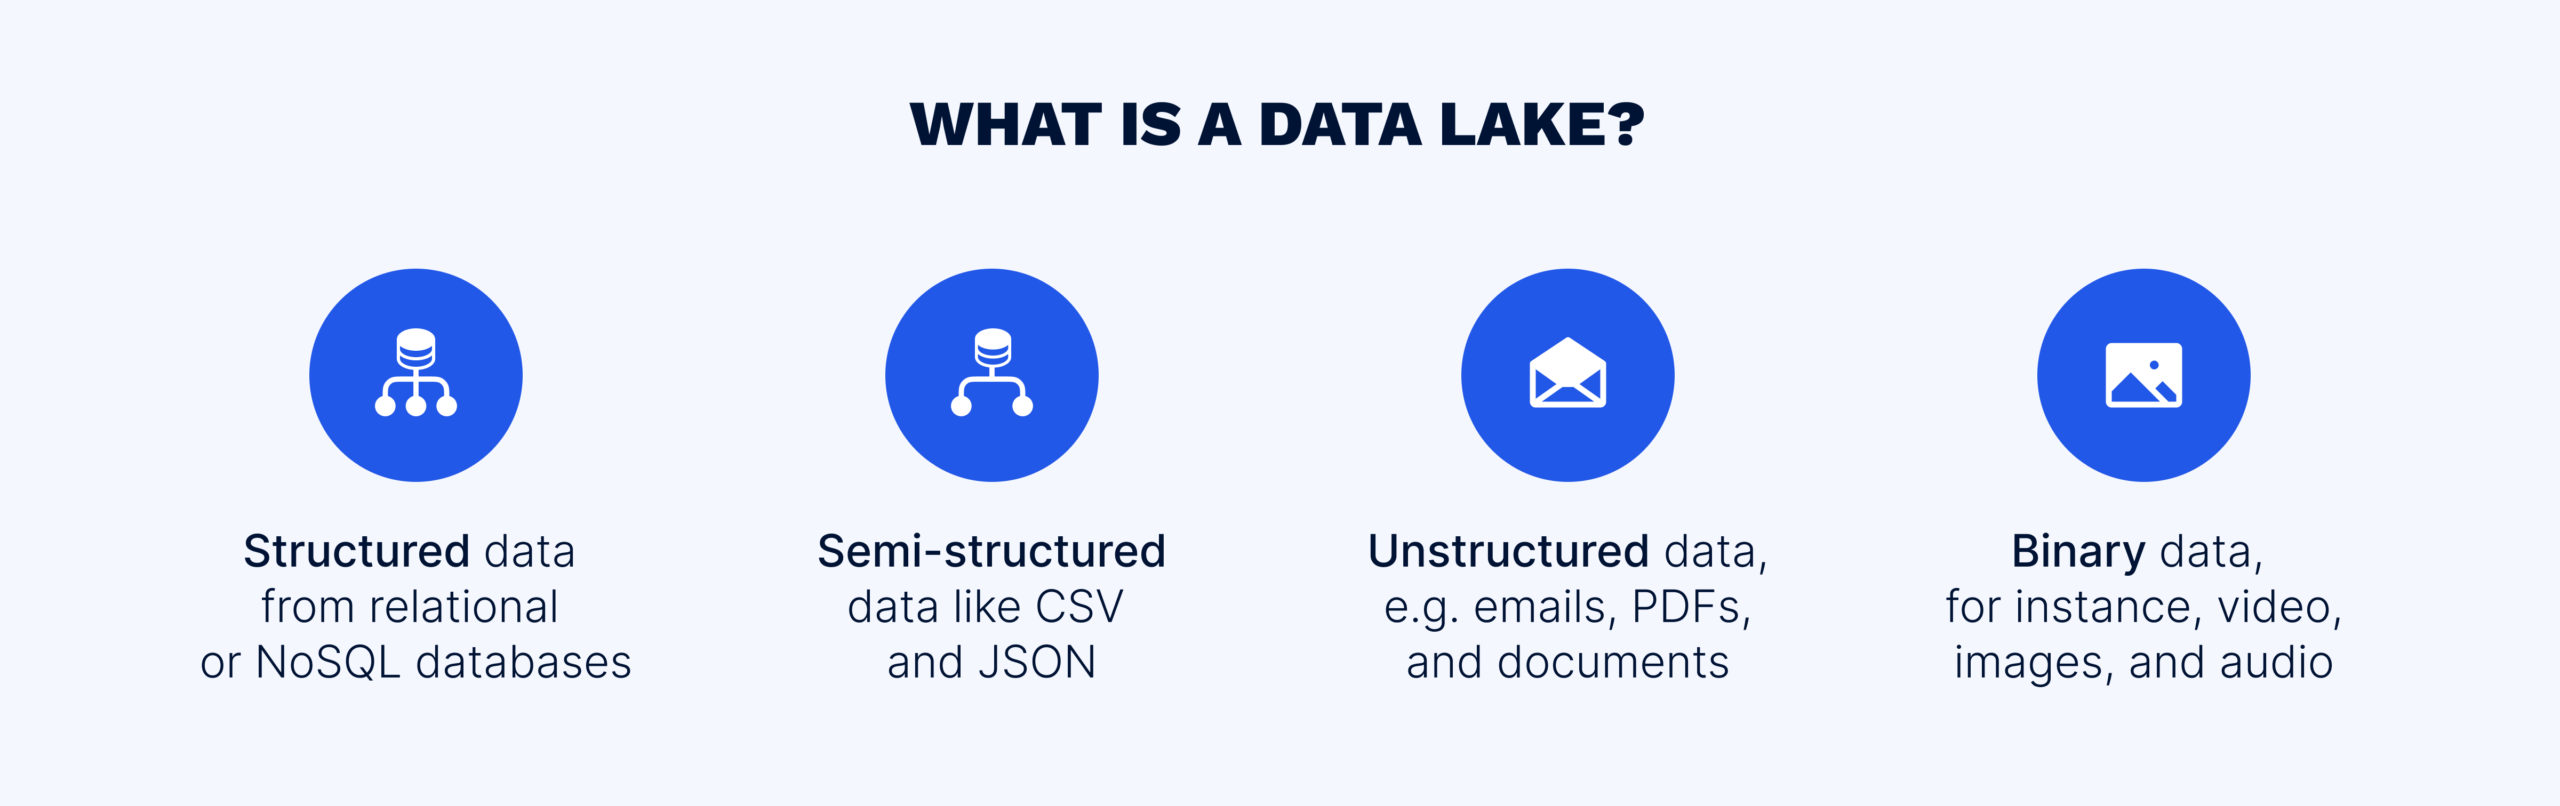 What is a data lake